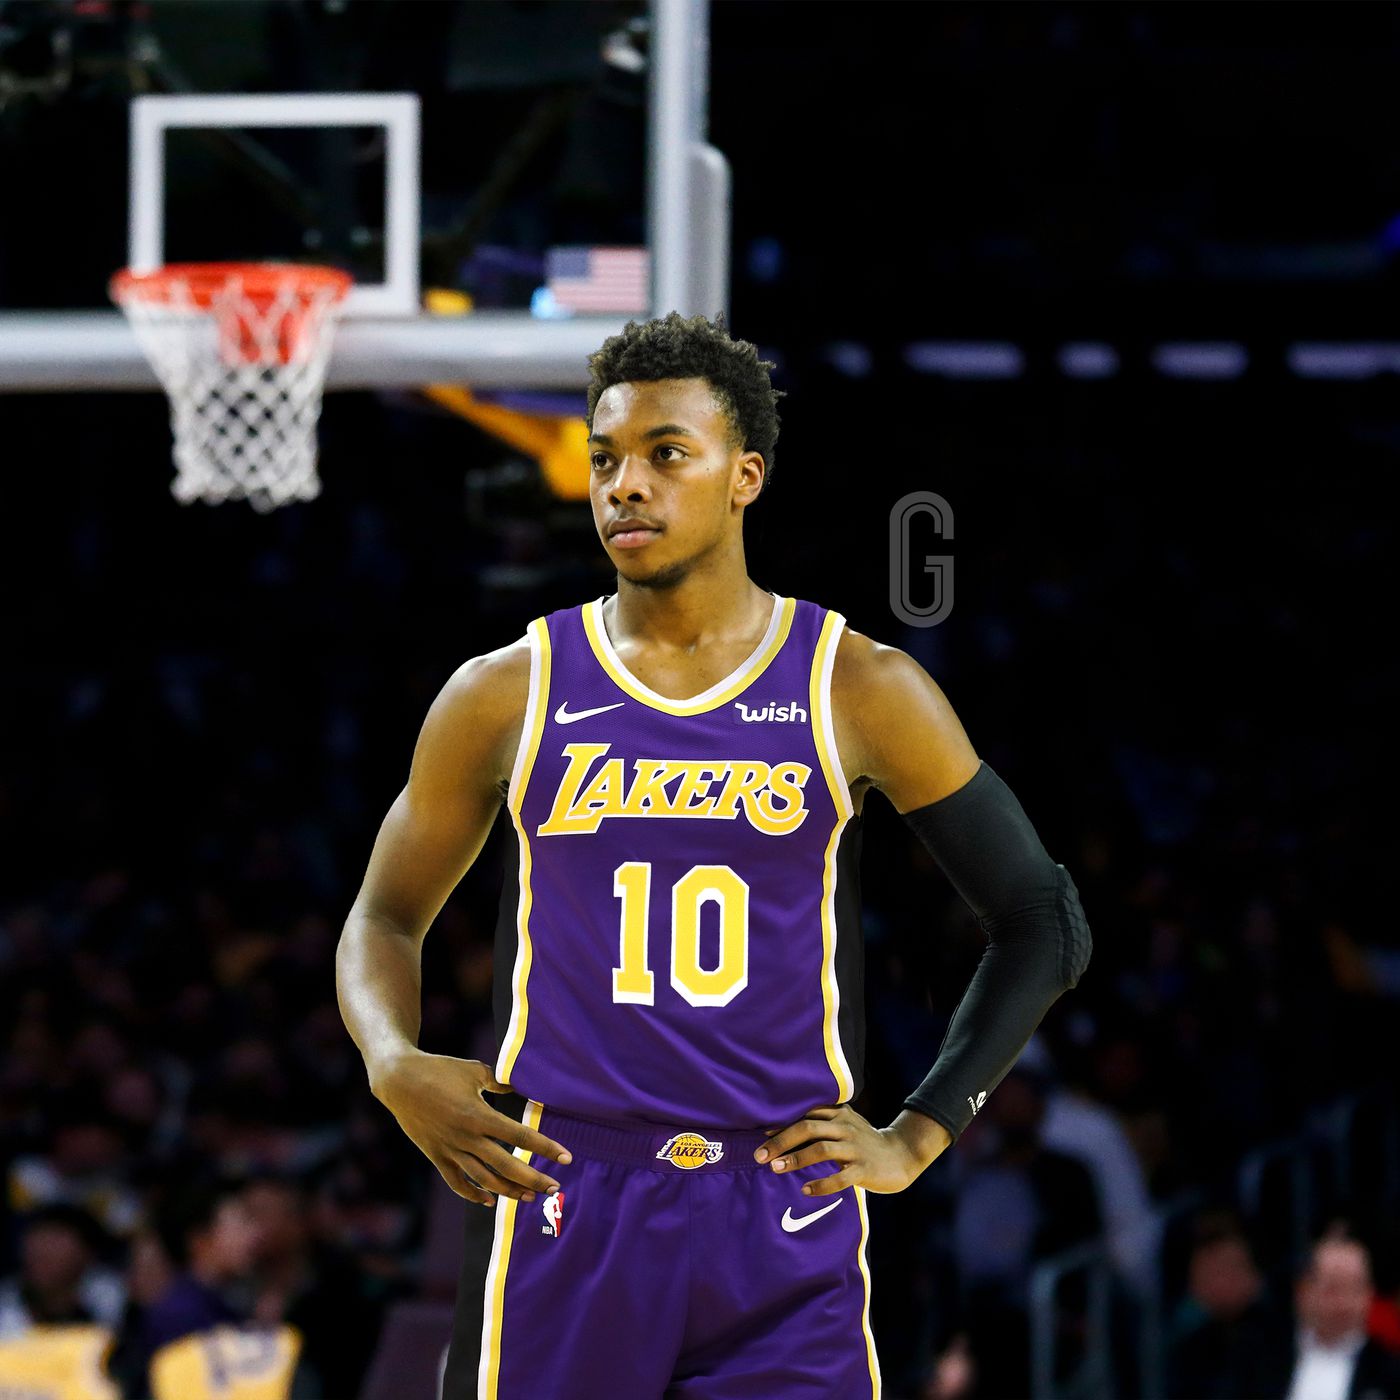 Darius Garland says it would be an honor to play for the Lakers